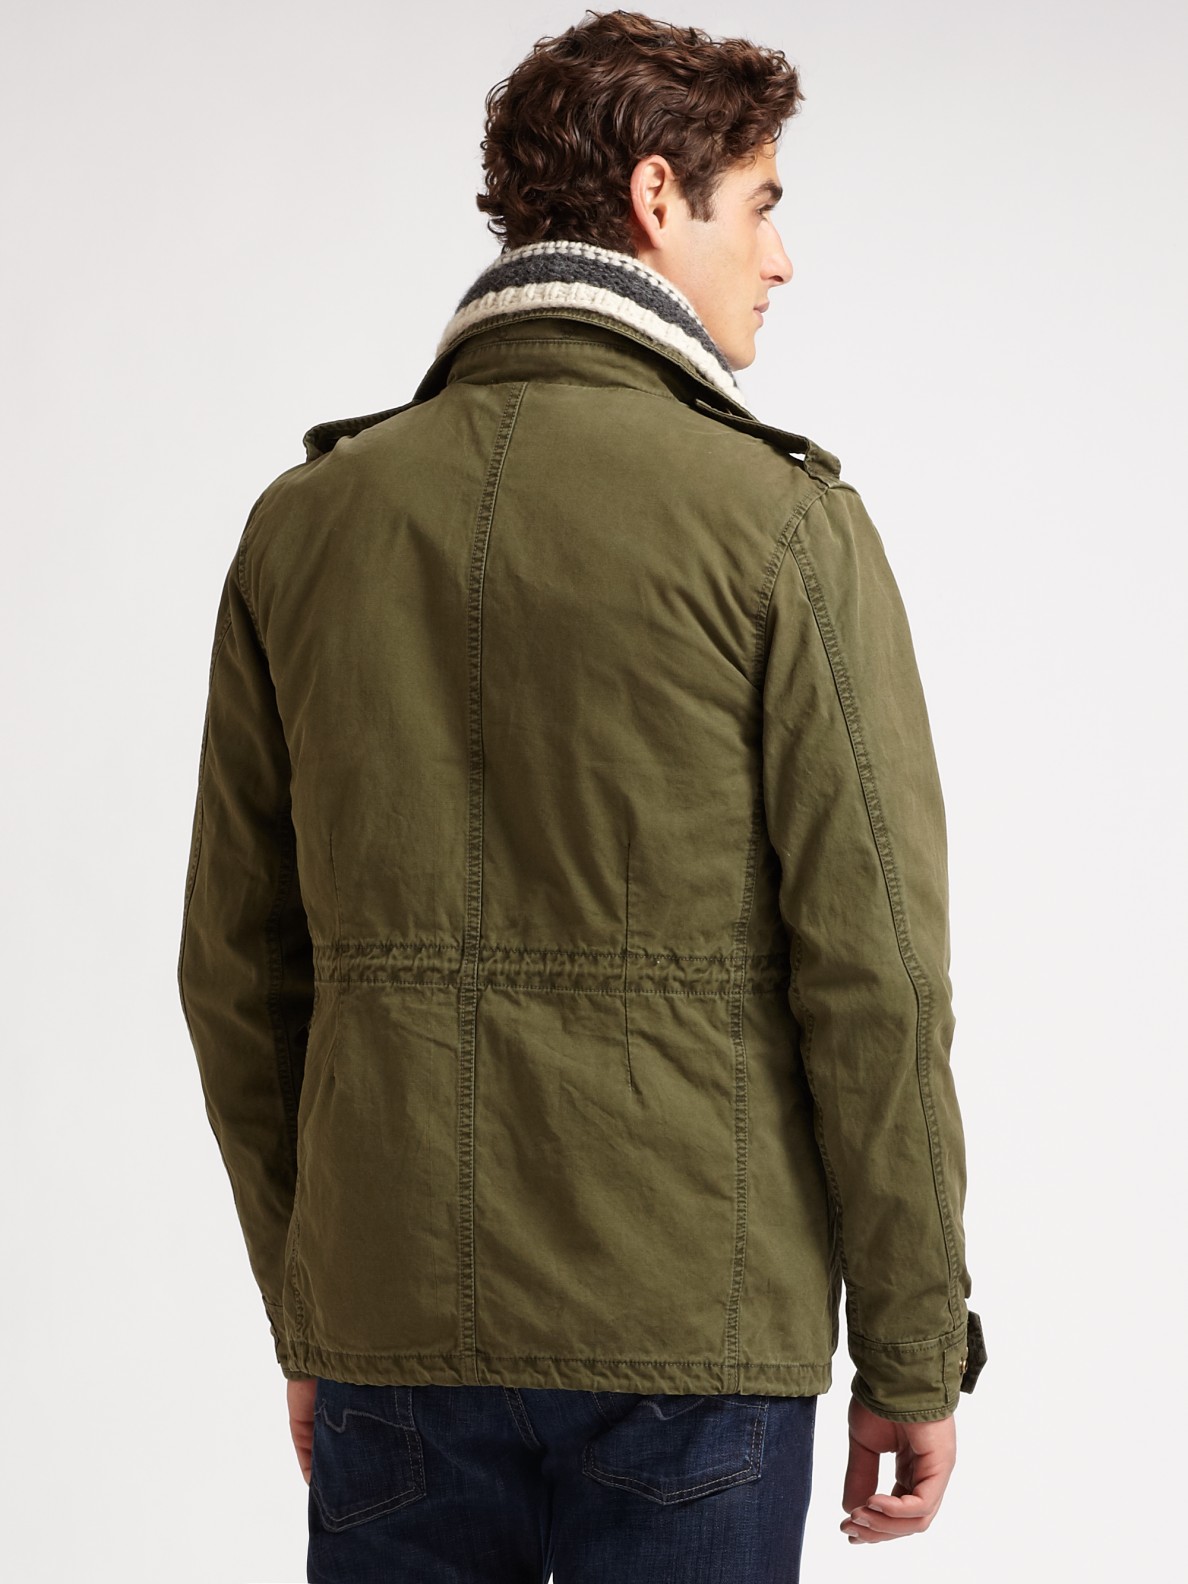 Lyst - Scotch & Soda Convertible Military Jacket in Green for Men